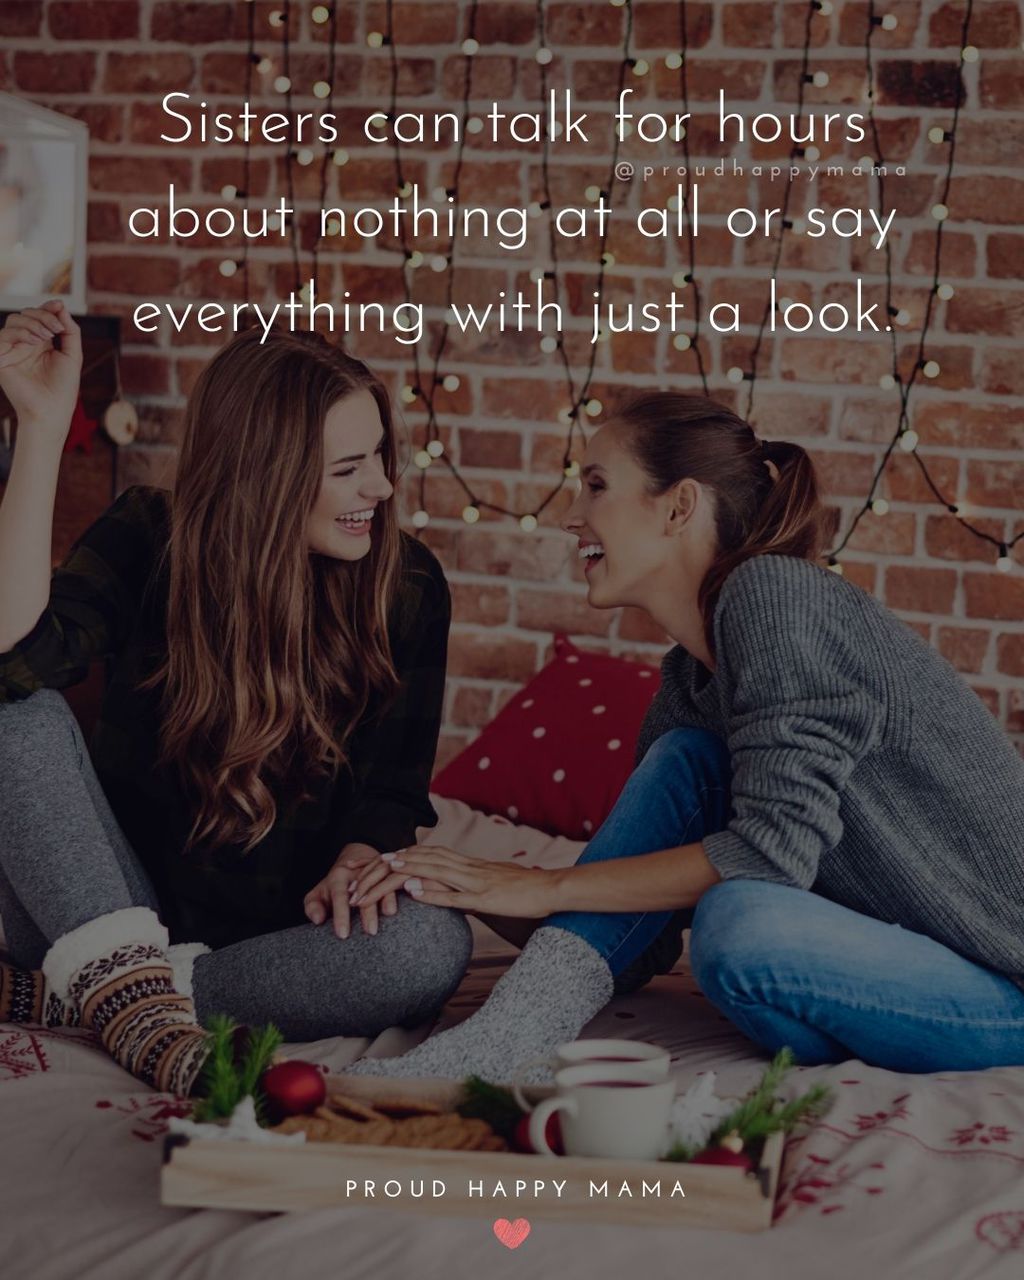 Sister Quotes - Sisters can talk for hours about nothing at all or say everything with just a look.